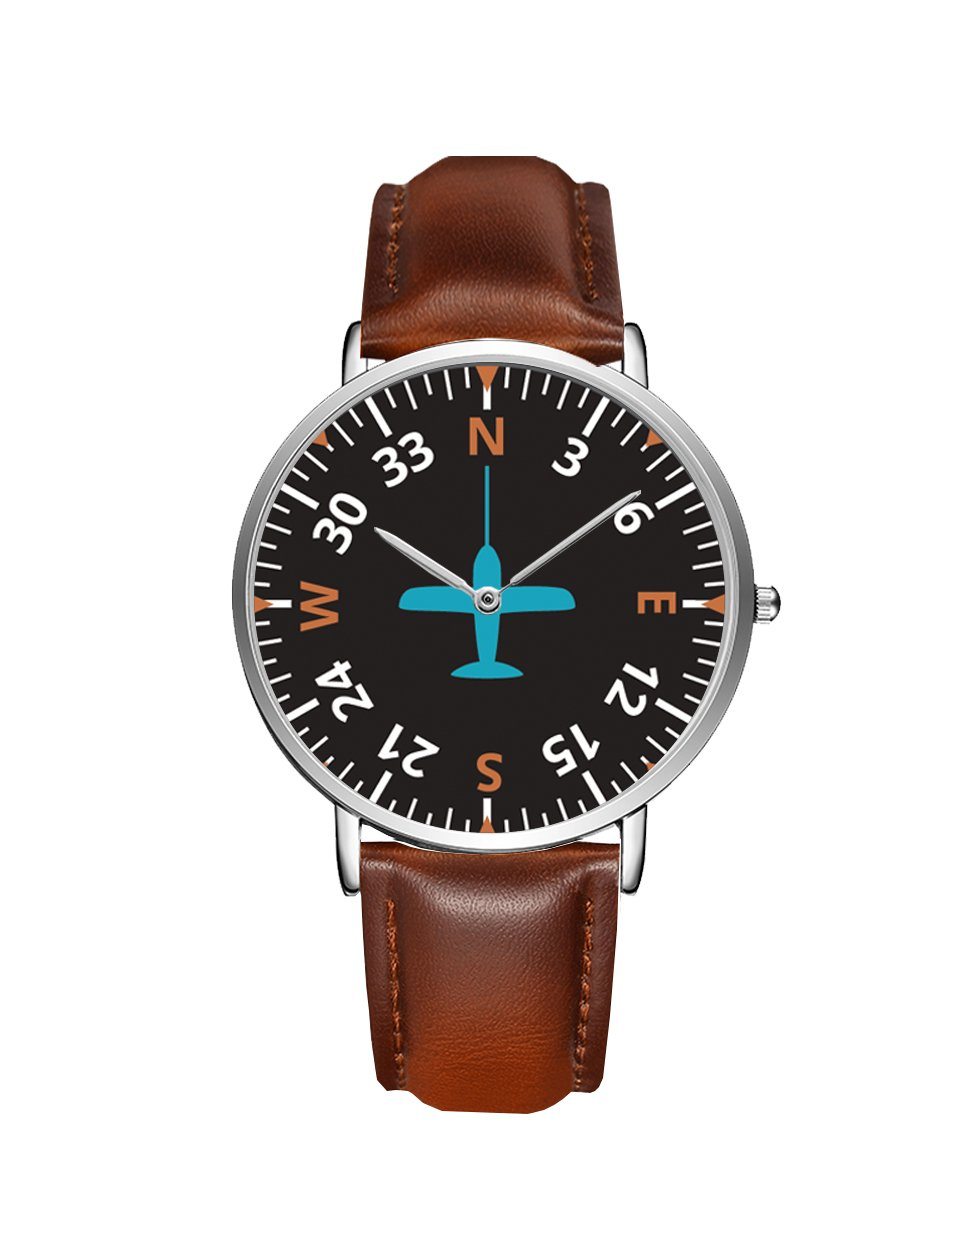 Airplane Instrument Series (Heading2) Leather Strap Watches Pilot Eyes Store Silver & Brown Leather Strap 